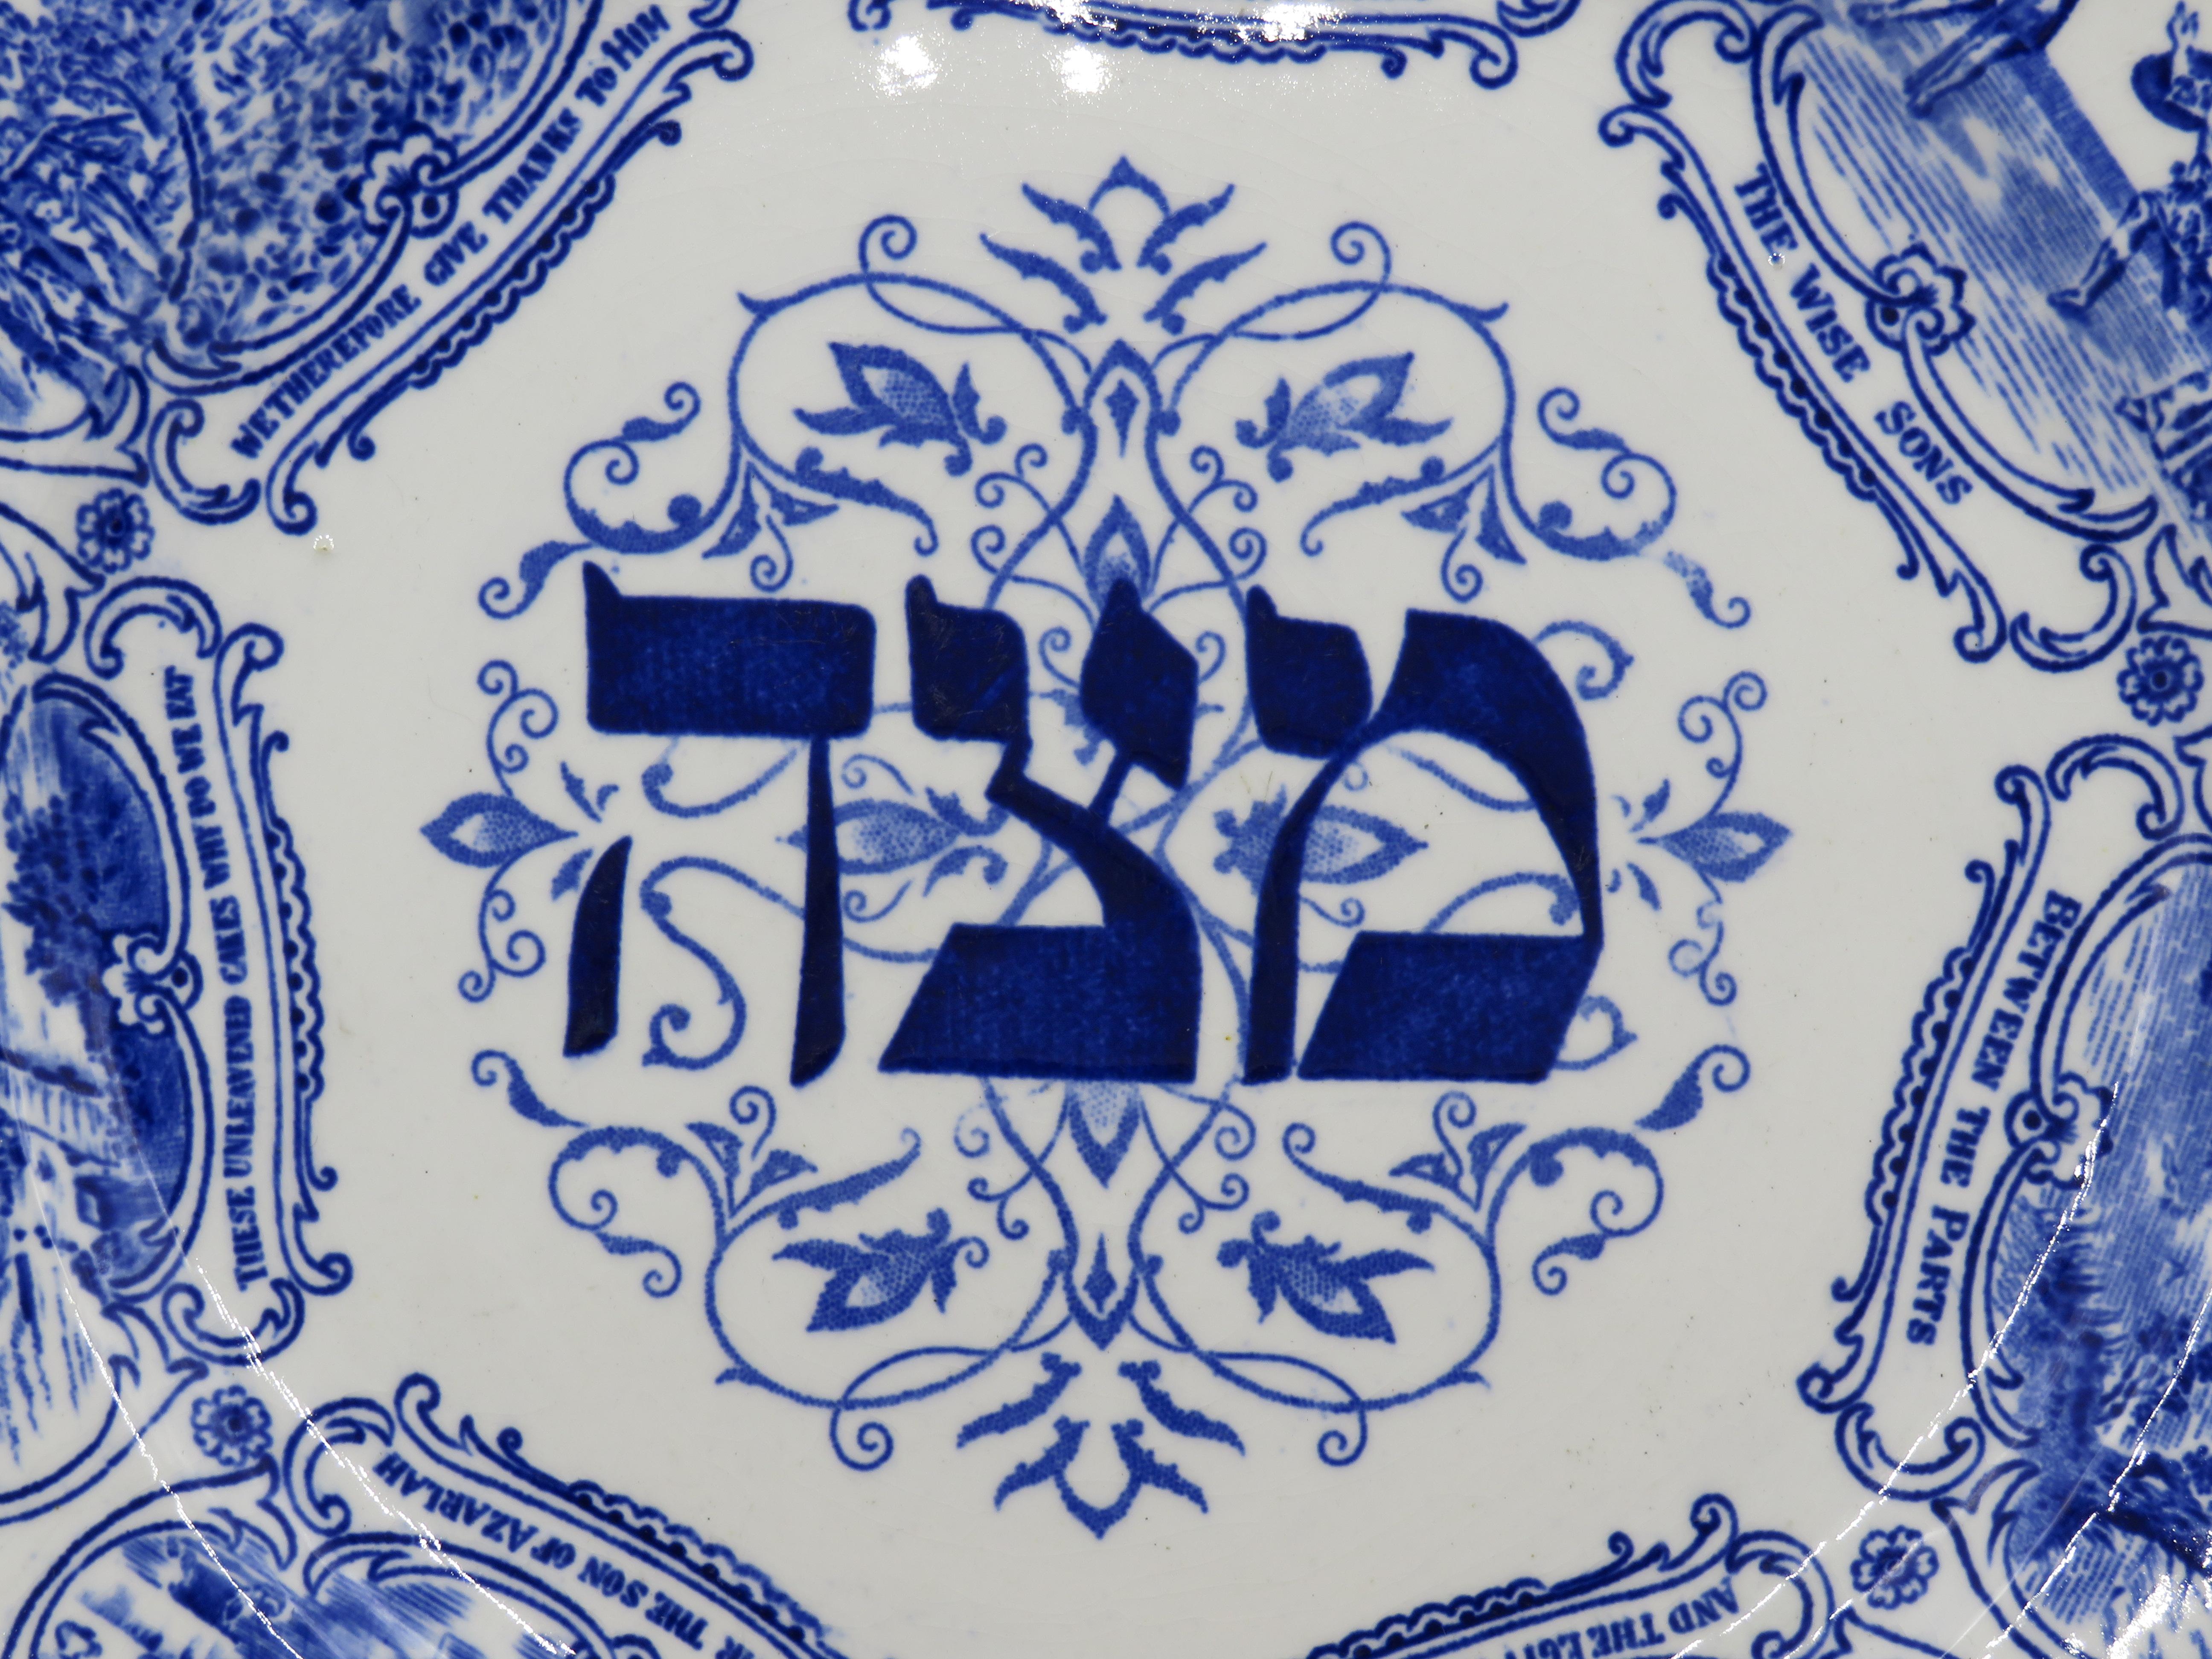 Blue and white pottery Passover plate, by Ridgeways, Staffordshire, England, circa 1850.
With scenes from the Passover services in blue and text of the paragraph Ma-Nishtanah.
The Hebrew word: 